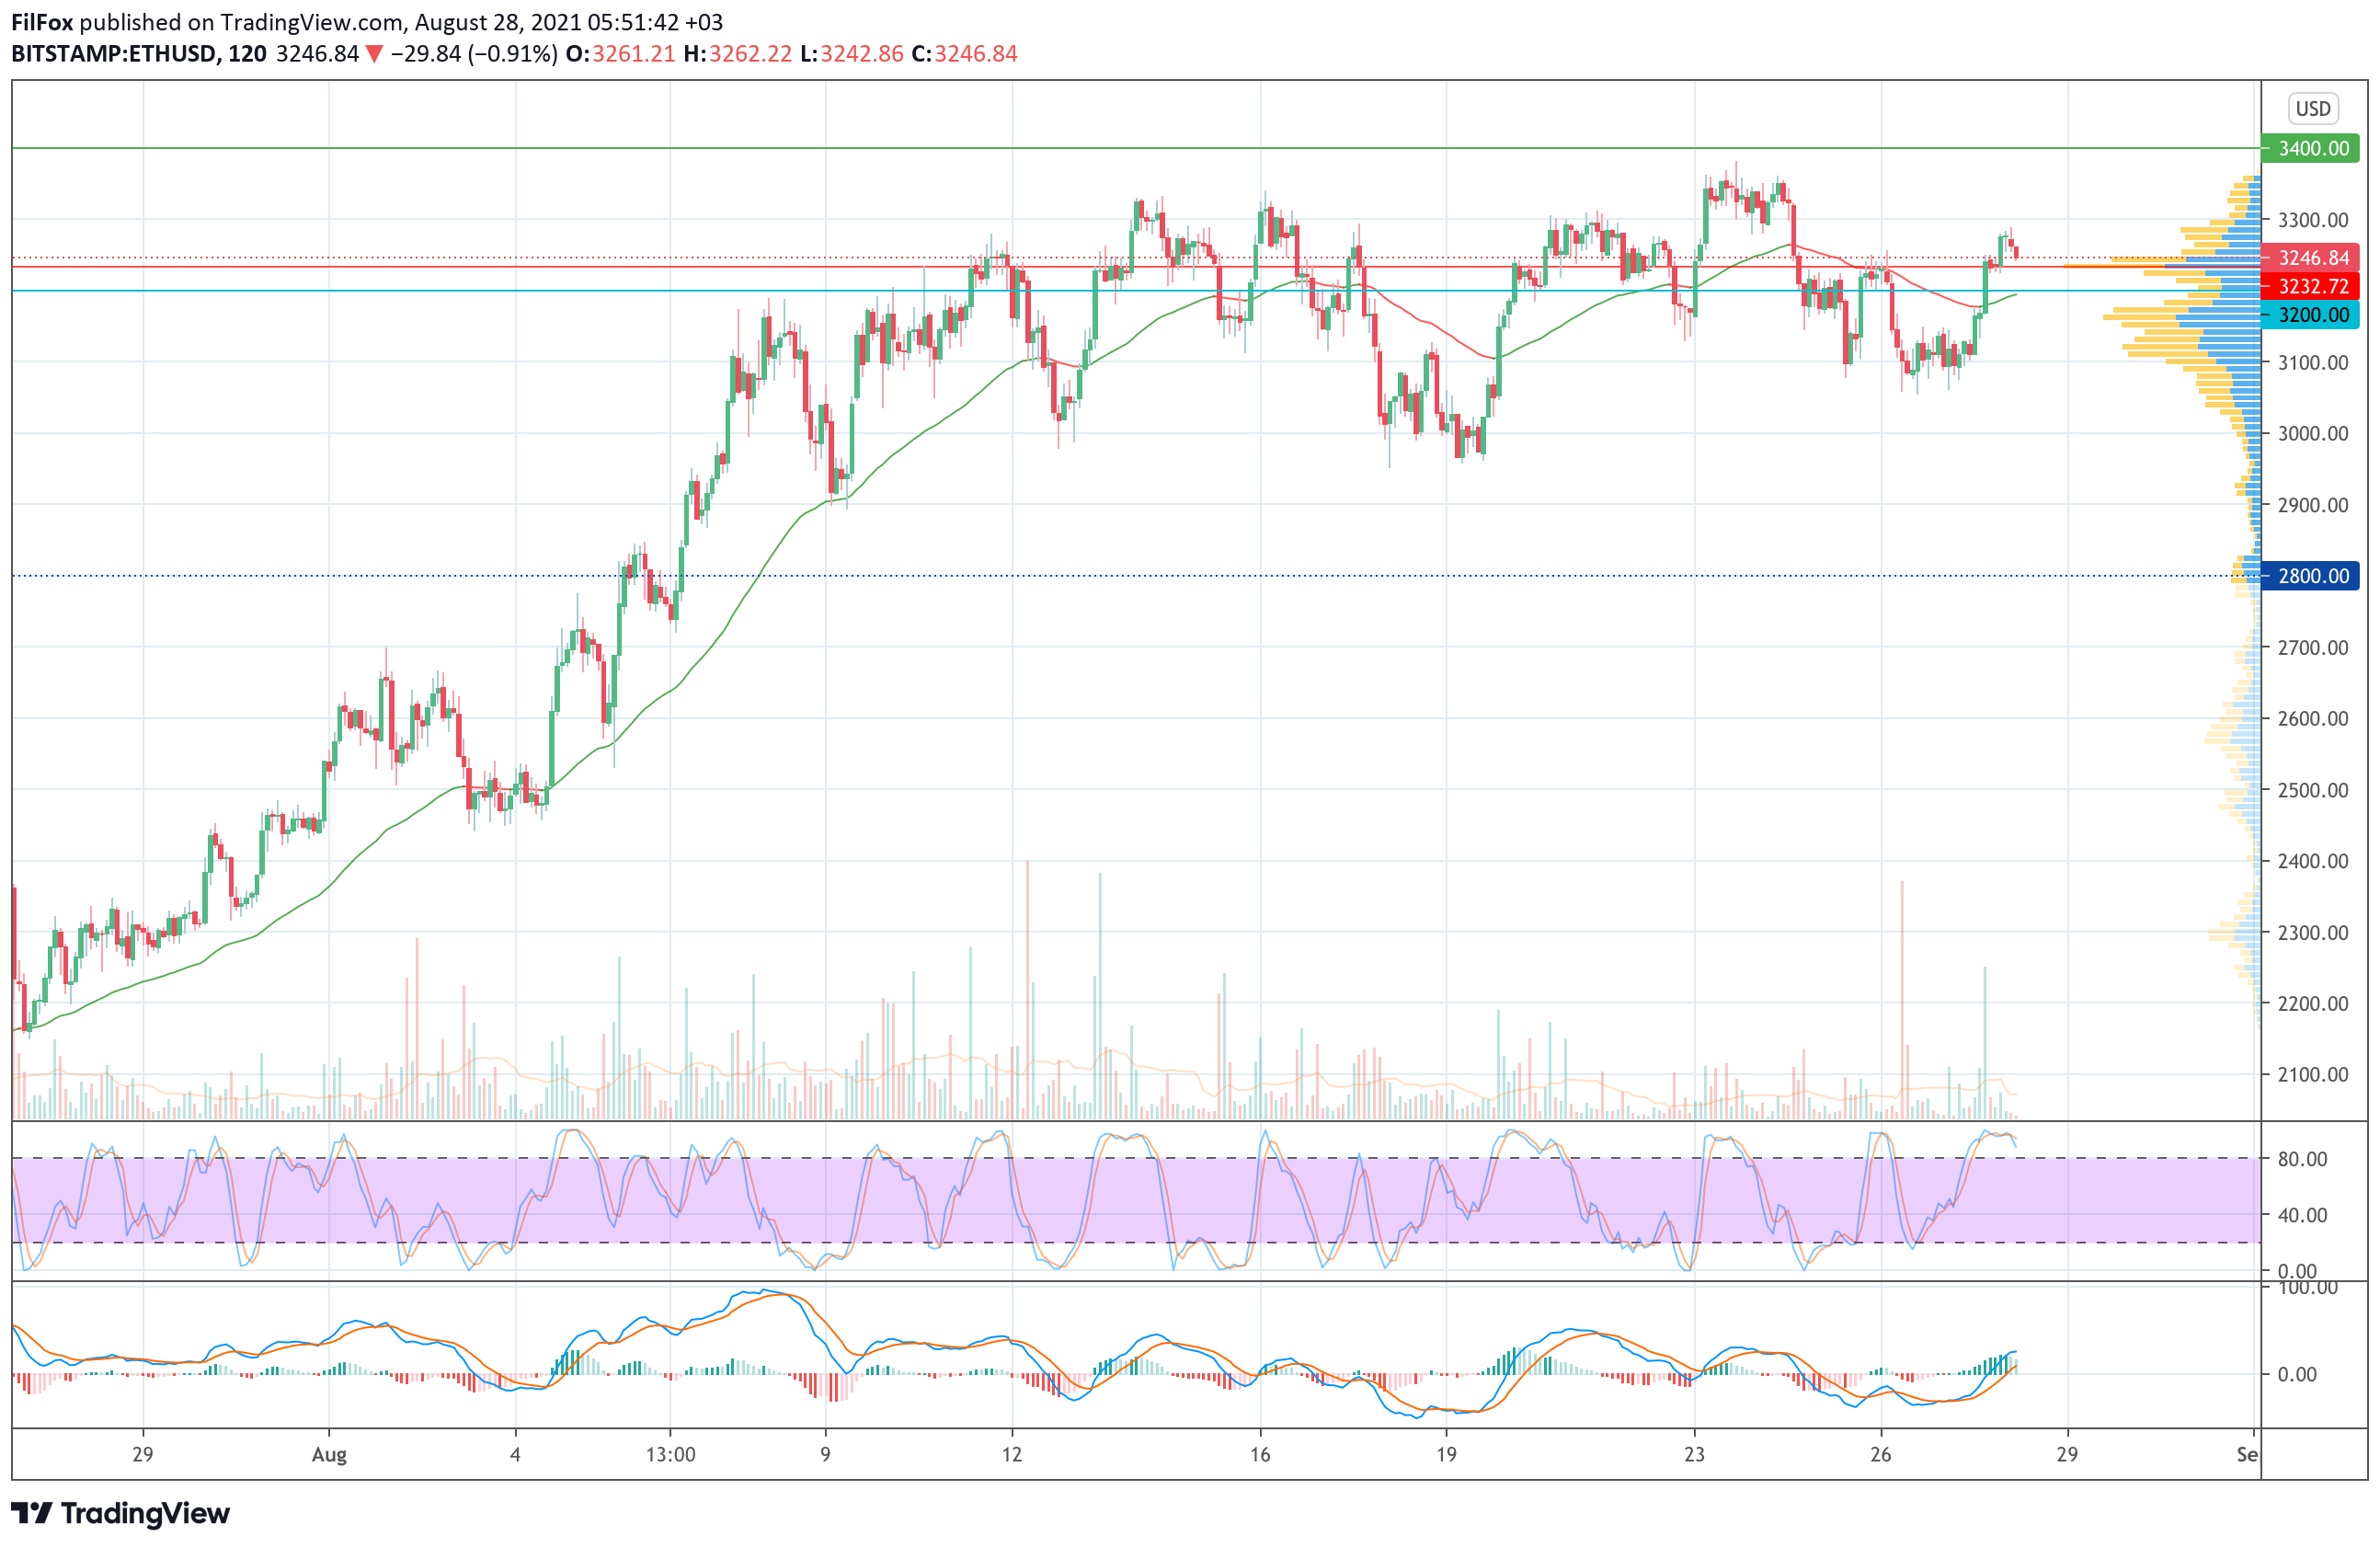 Analysis of prices for Bitcoin, Ethereum, XRP for 08/28/2021